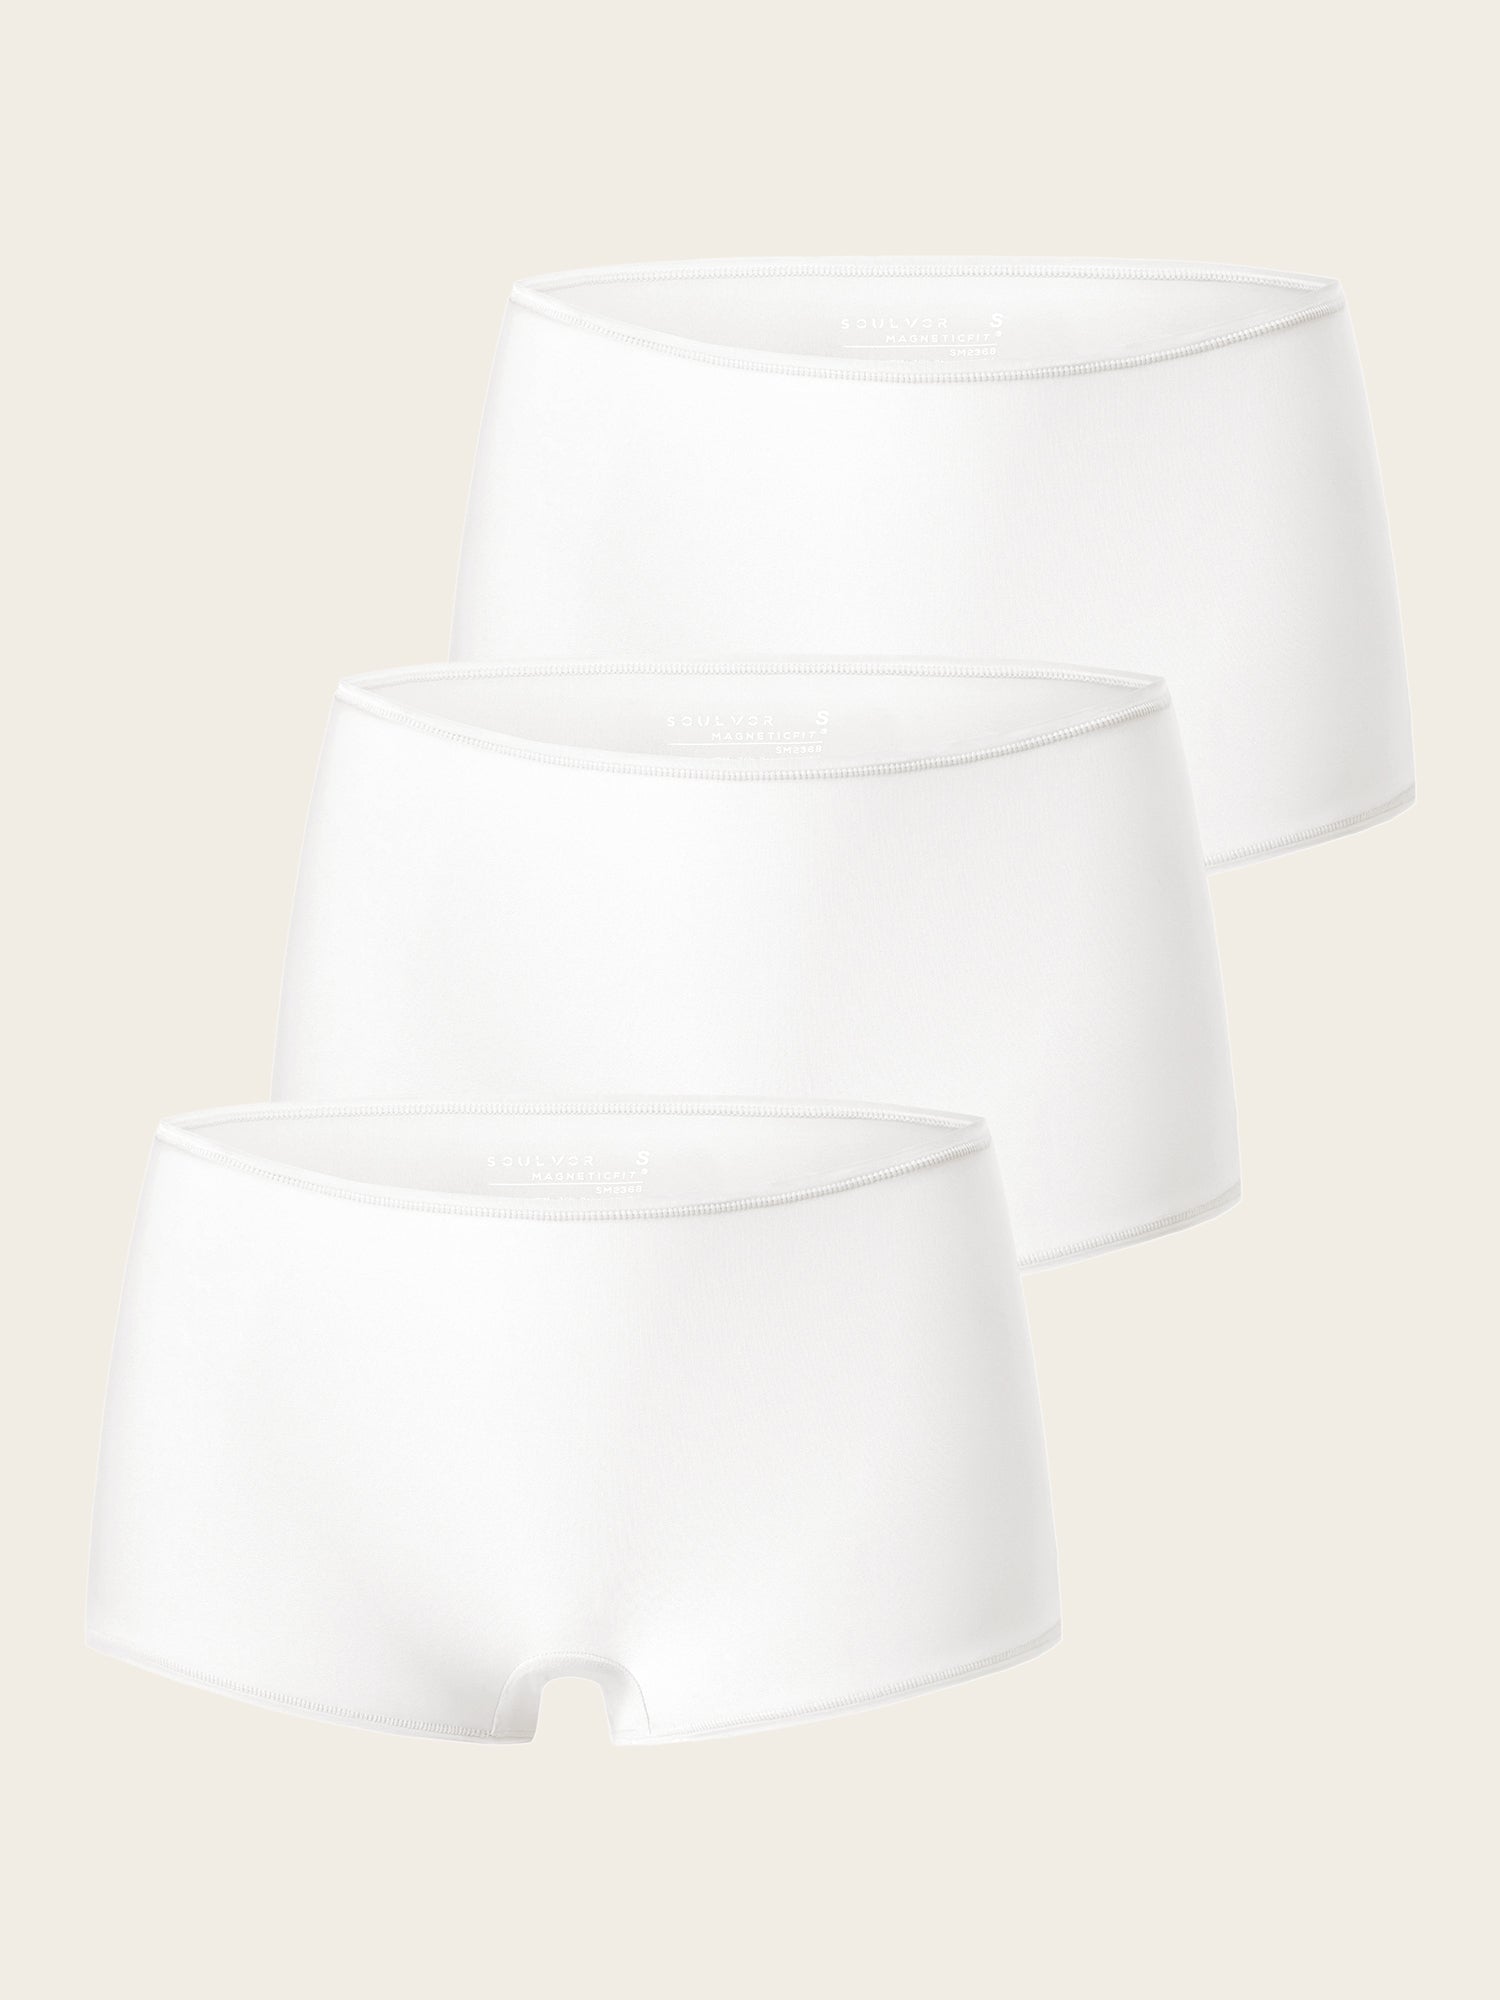 MagneticFit Stretchy Boy Short 3 Pack White (3pack)